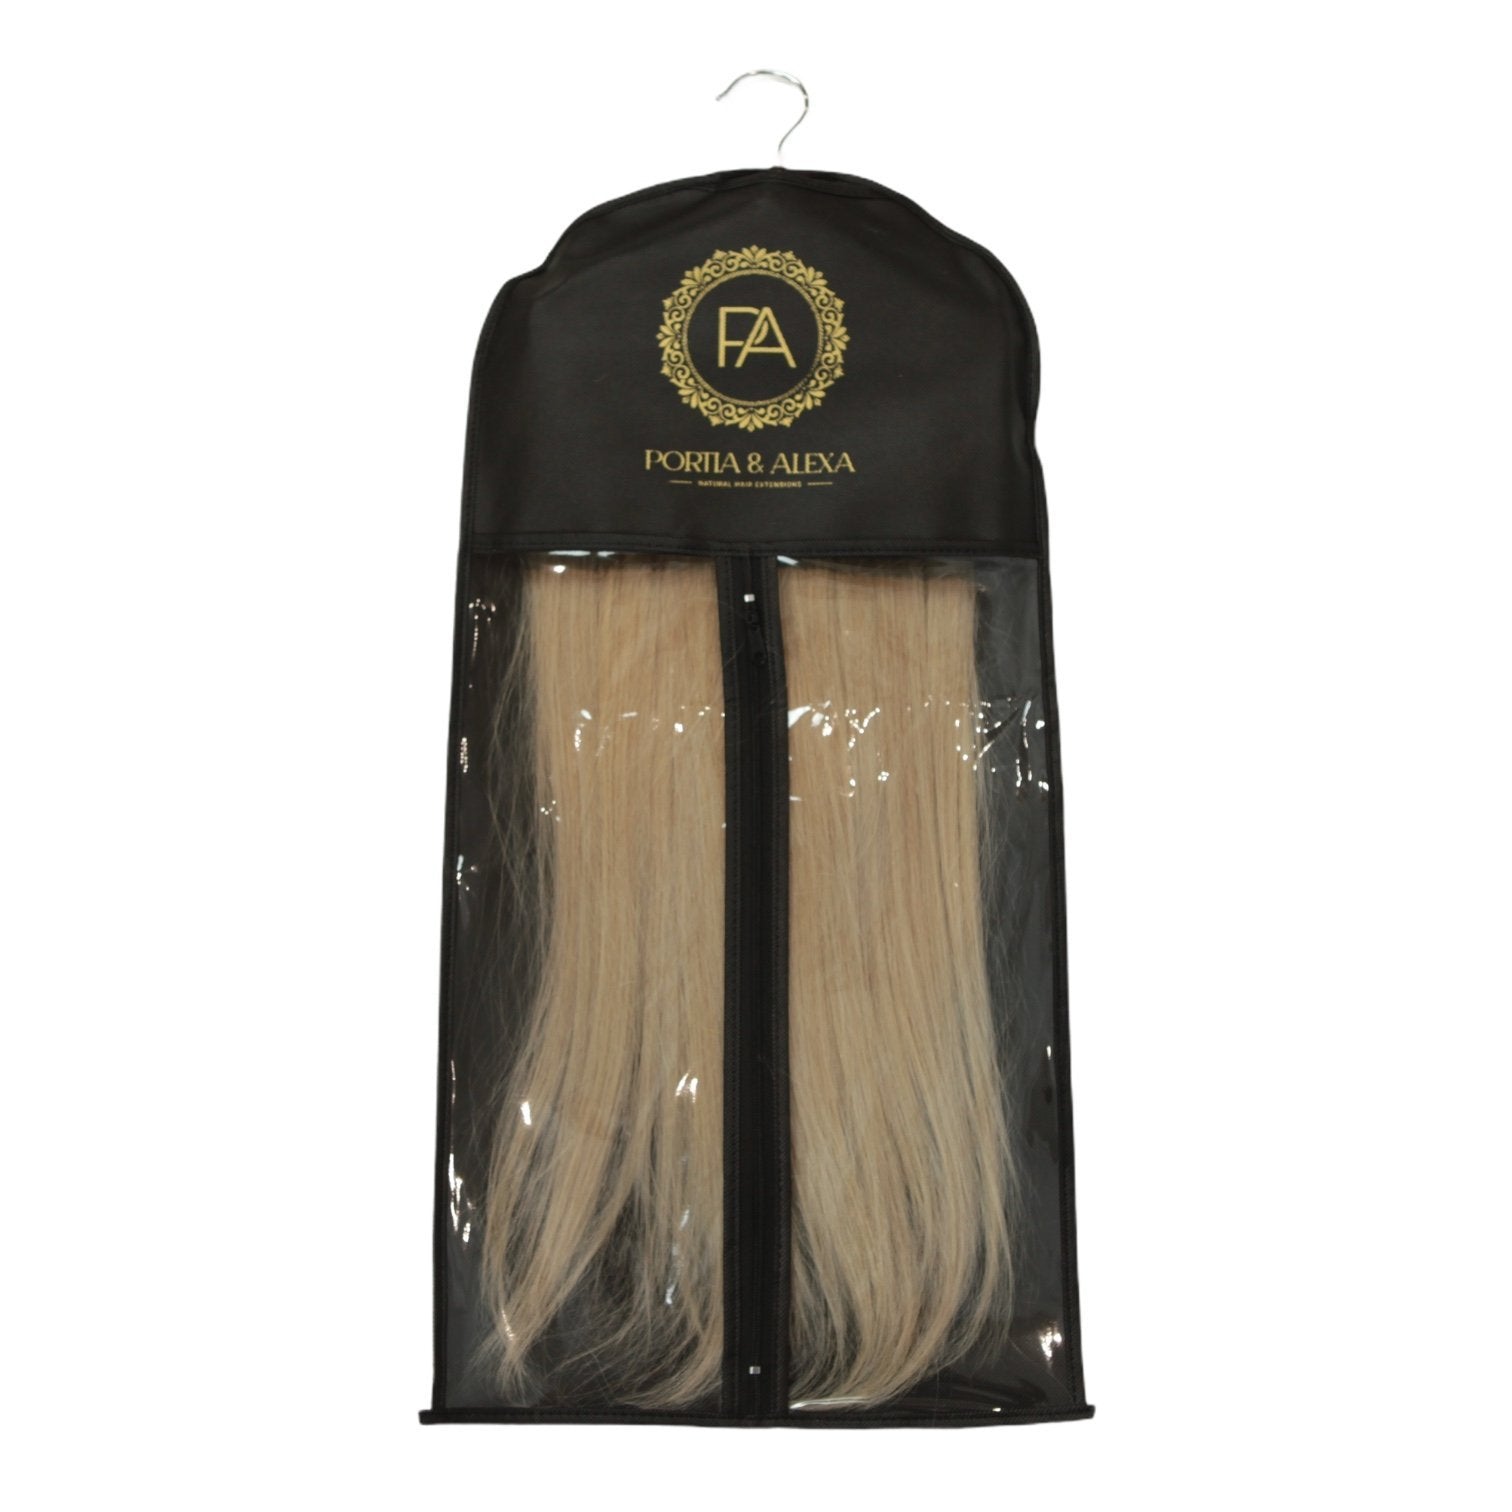 Hair Extensions Pro Tool Kit